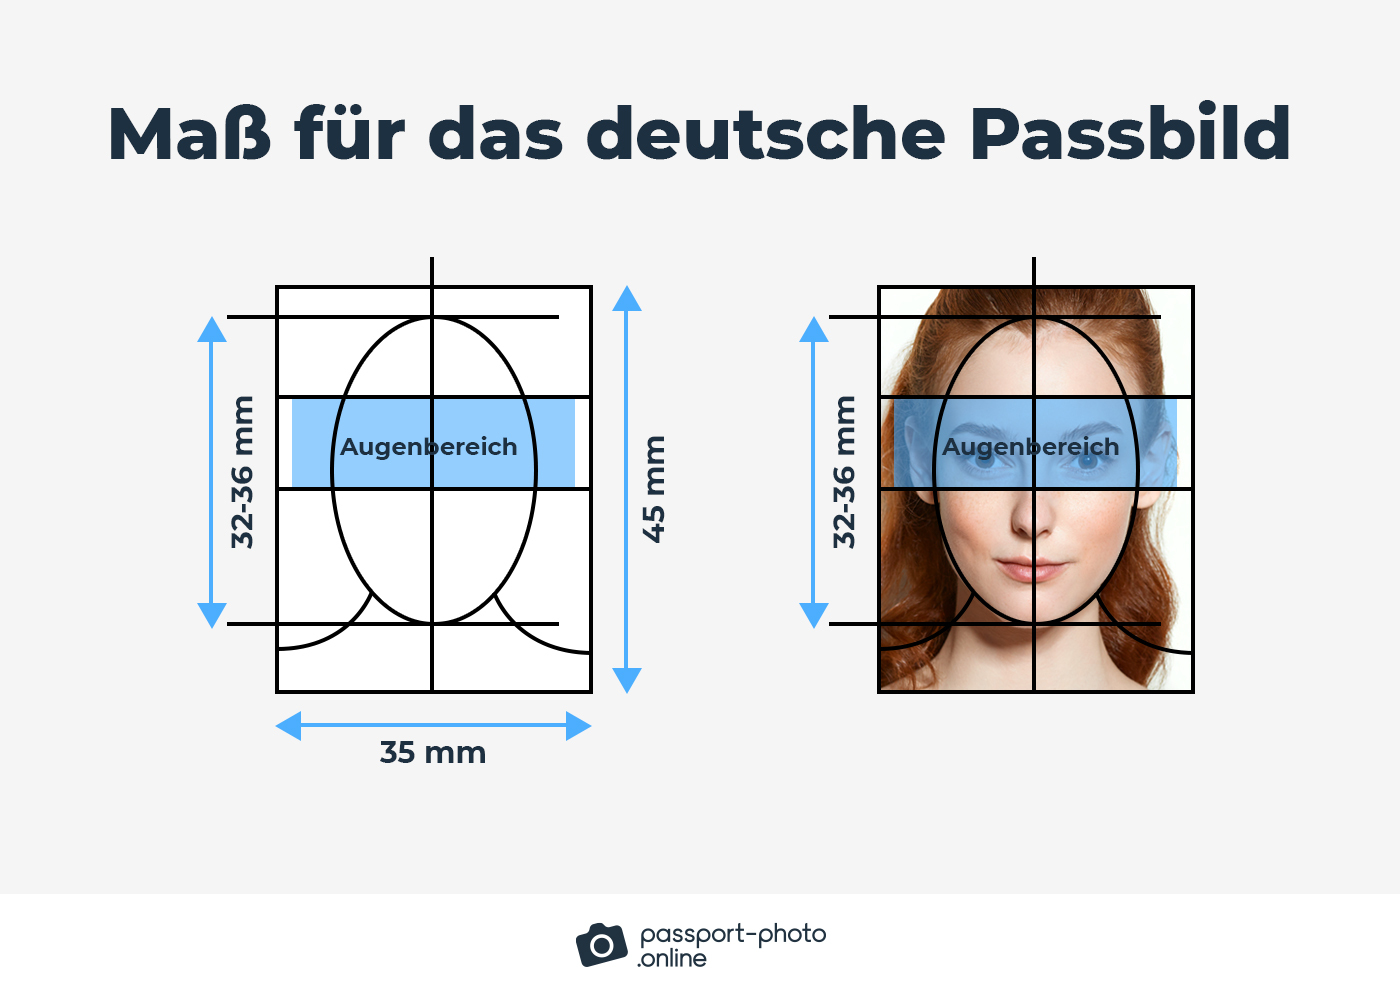 graphic showing correct size of a German passport photo